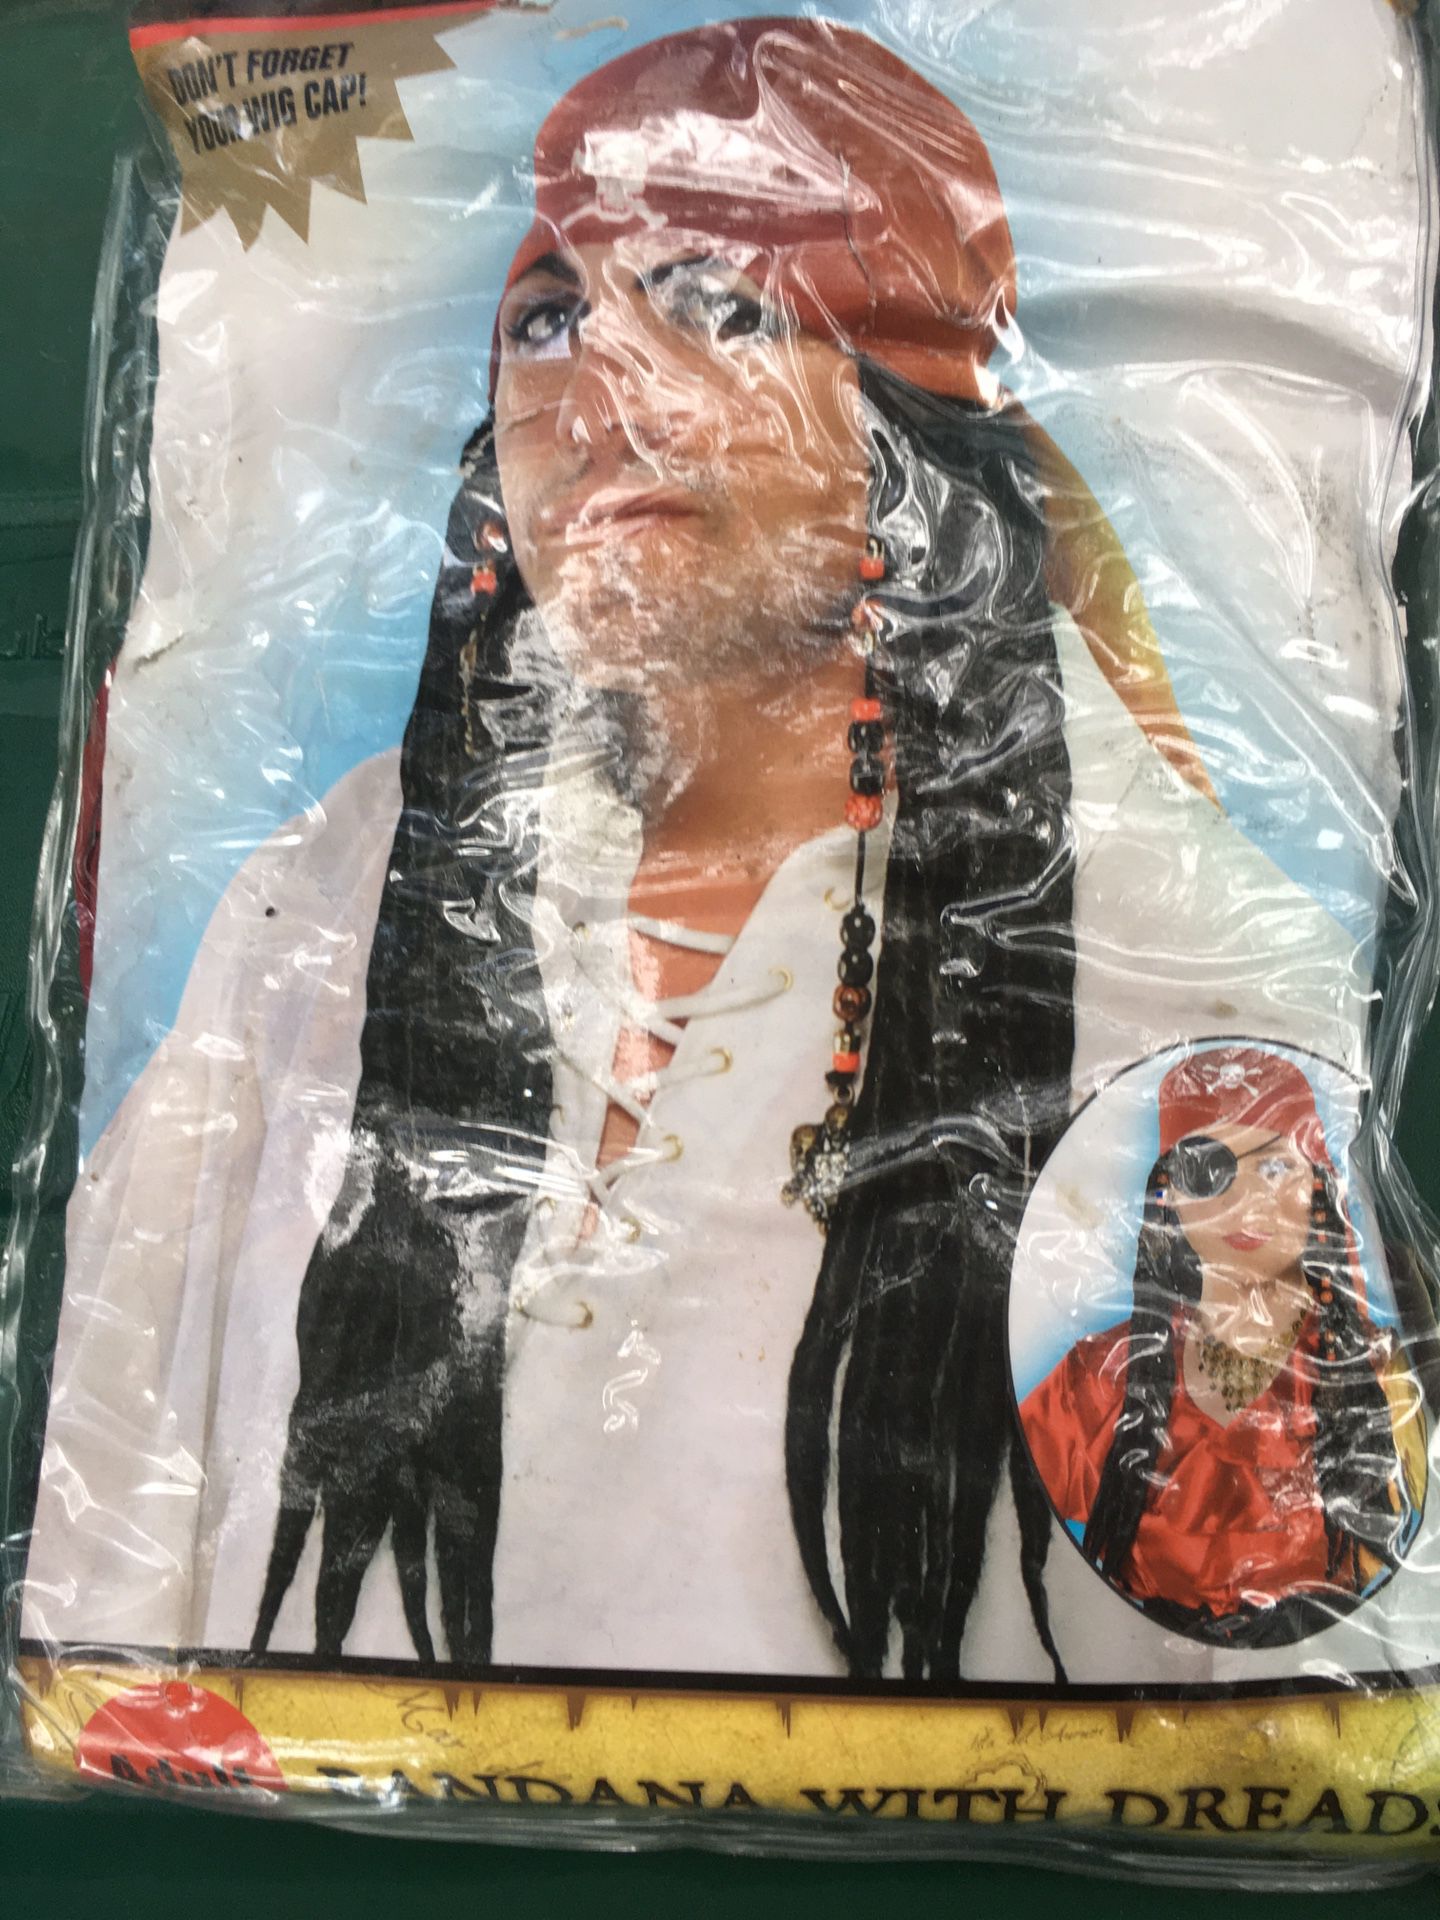 Pirate Headset costume only $10